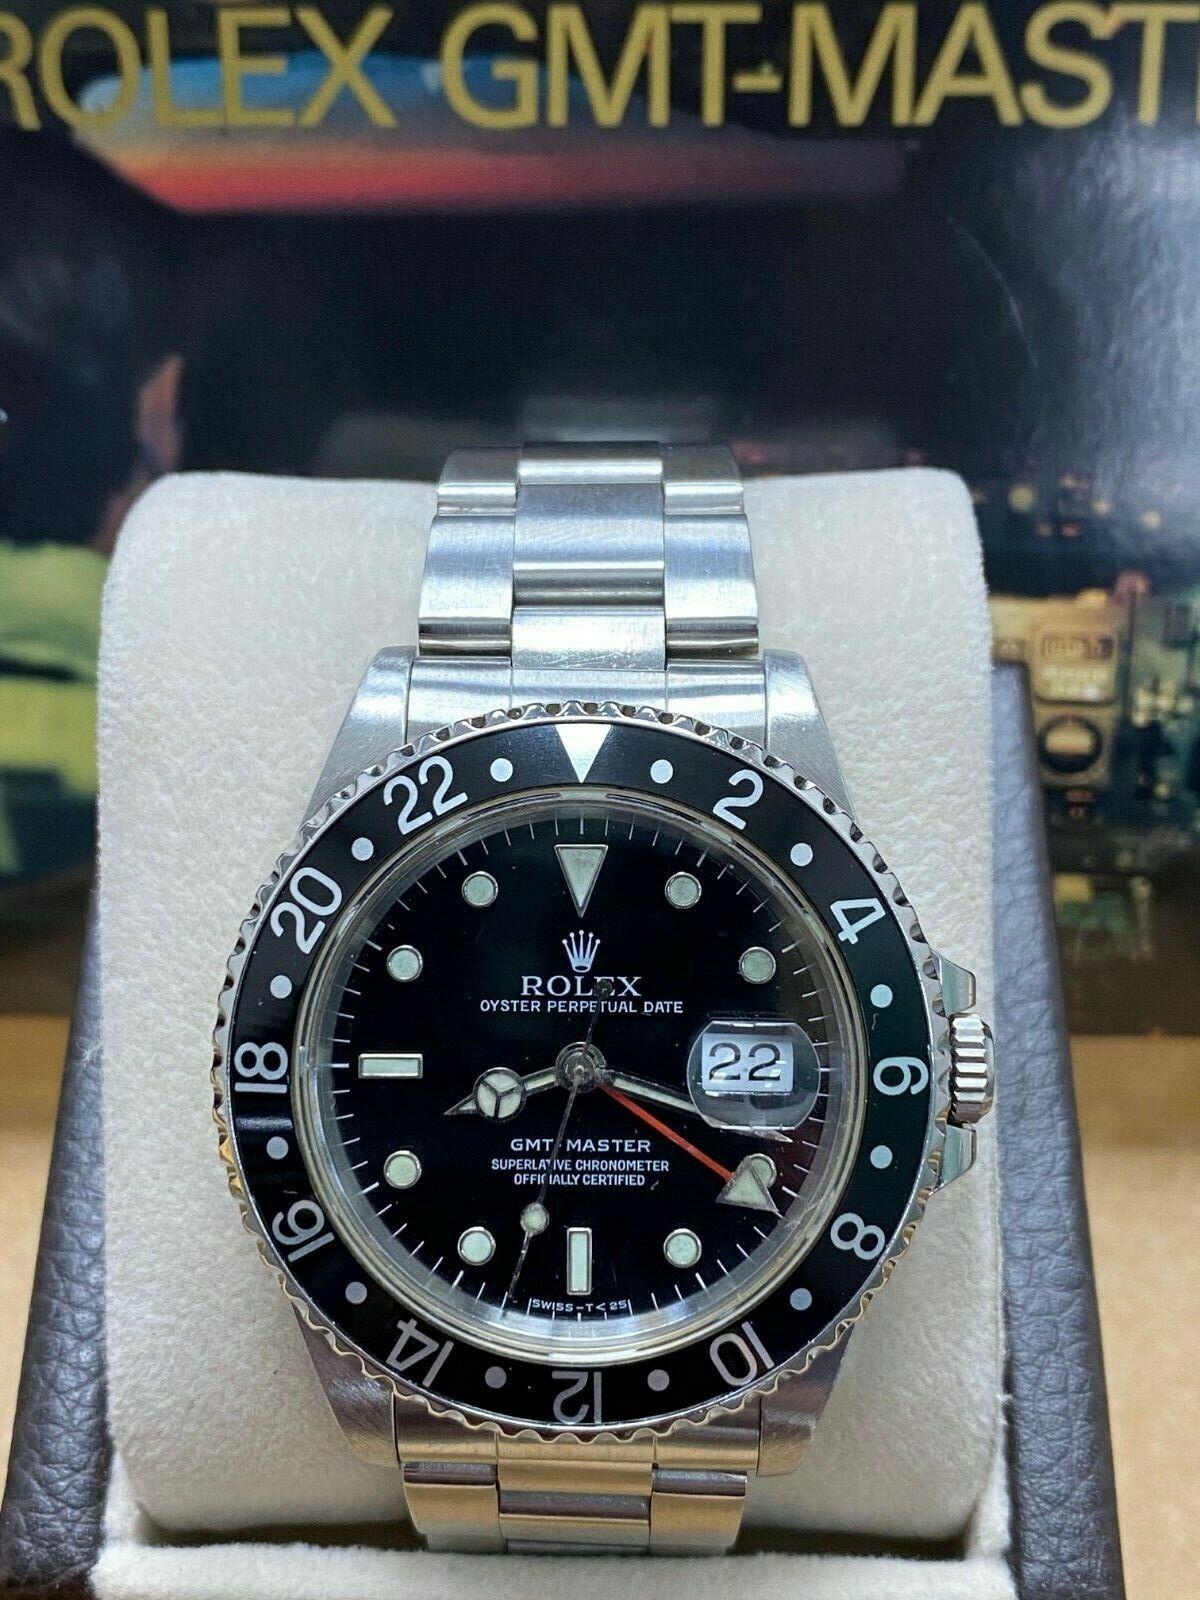 Style Number: 16700

 

Serial: E634***



Model: GMT Master 

 

Case Material: Stainless Steel

 

Band: Stainless Steel

 

Bezel: Black

 

Dial: Black

 

Face: Sapphire Crystal

 

Case Size: 40mm

 

Includes: 

-Rolex Box &